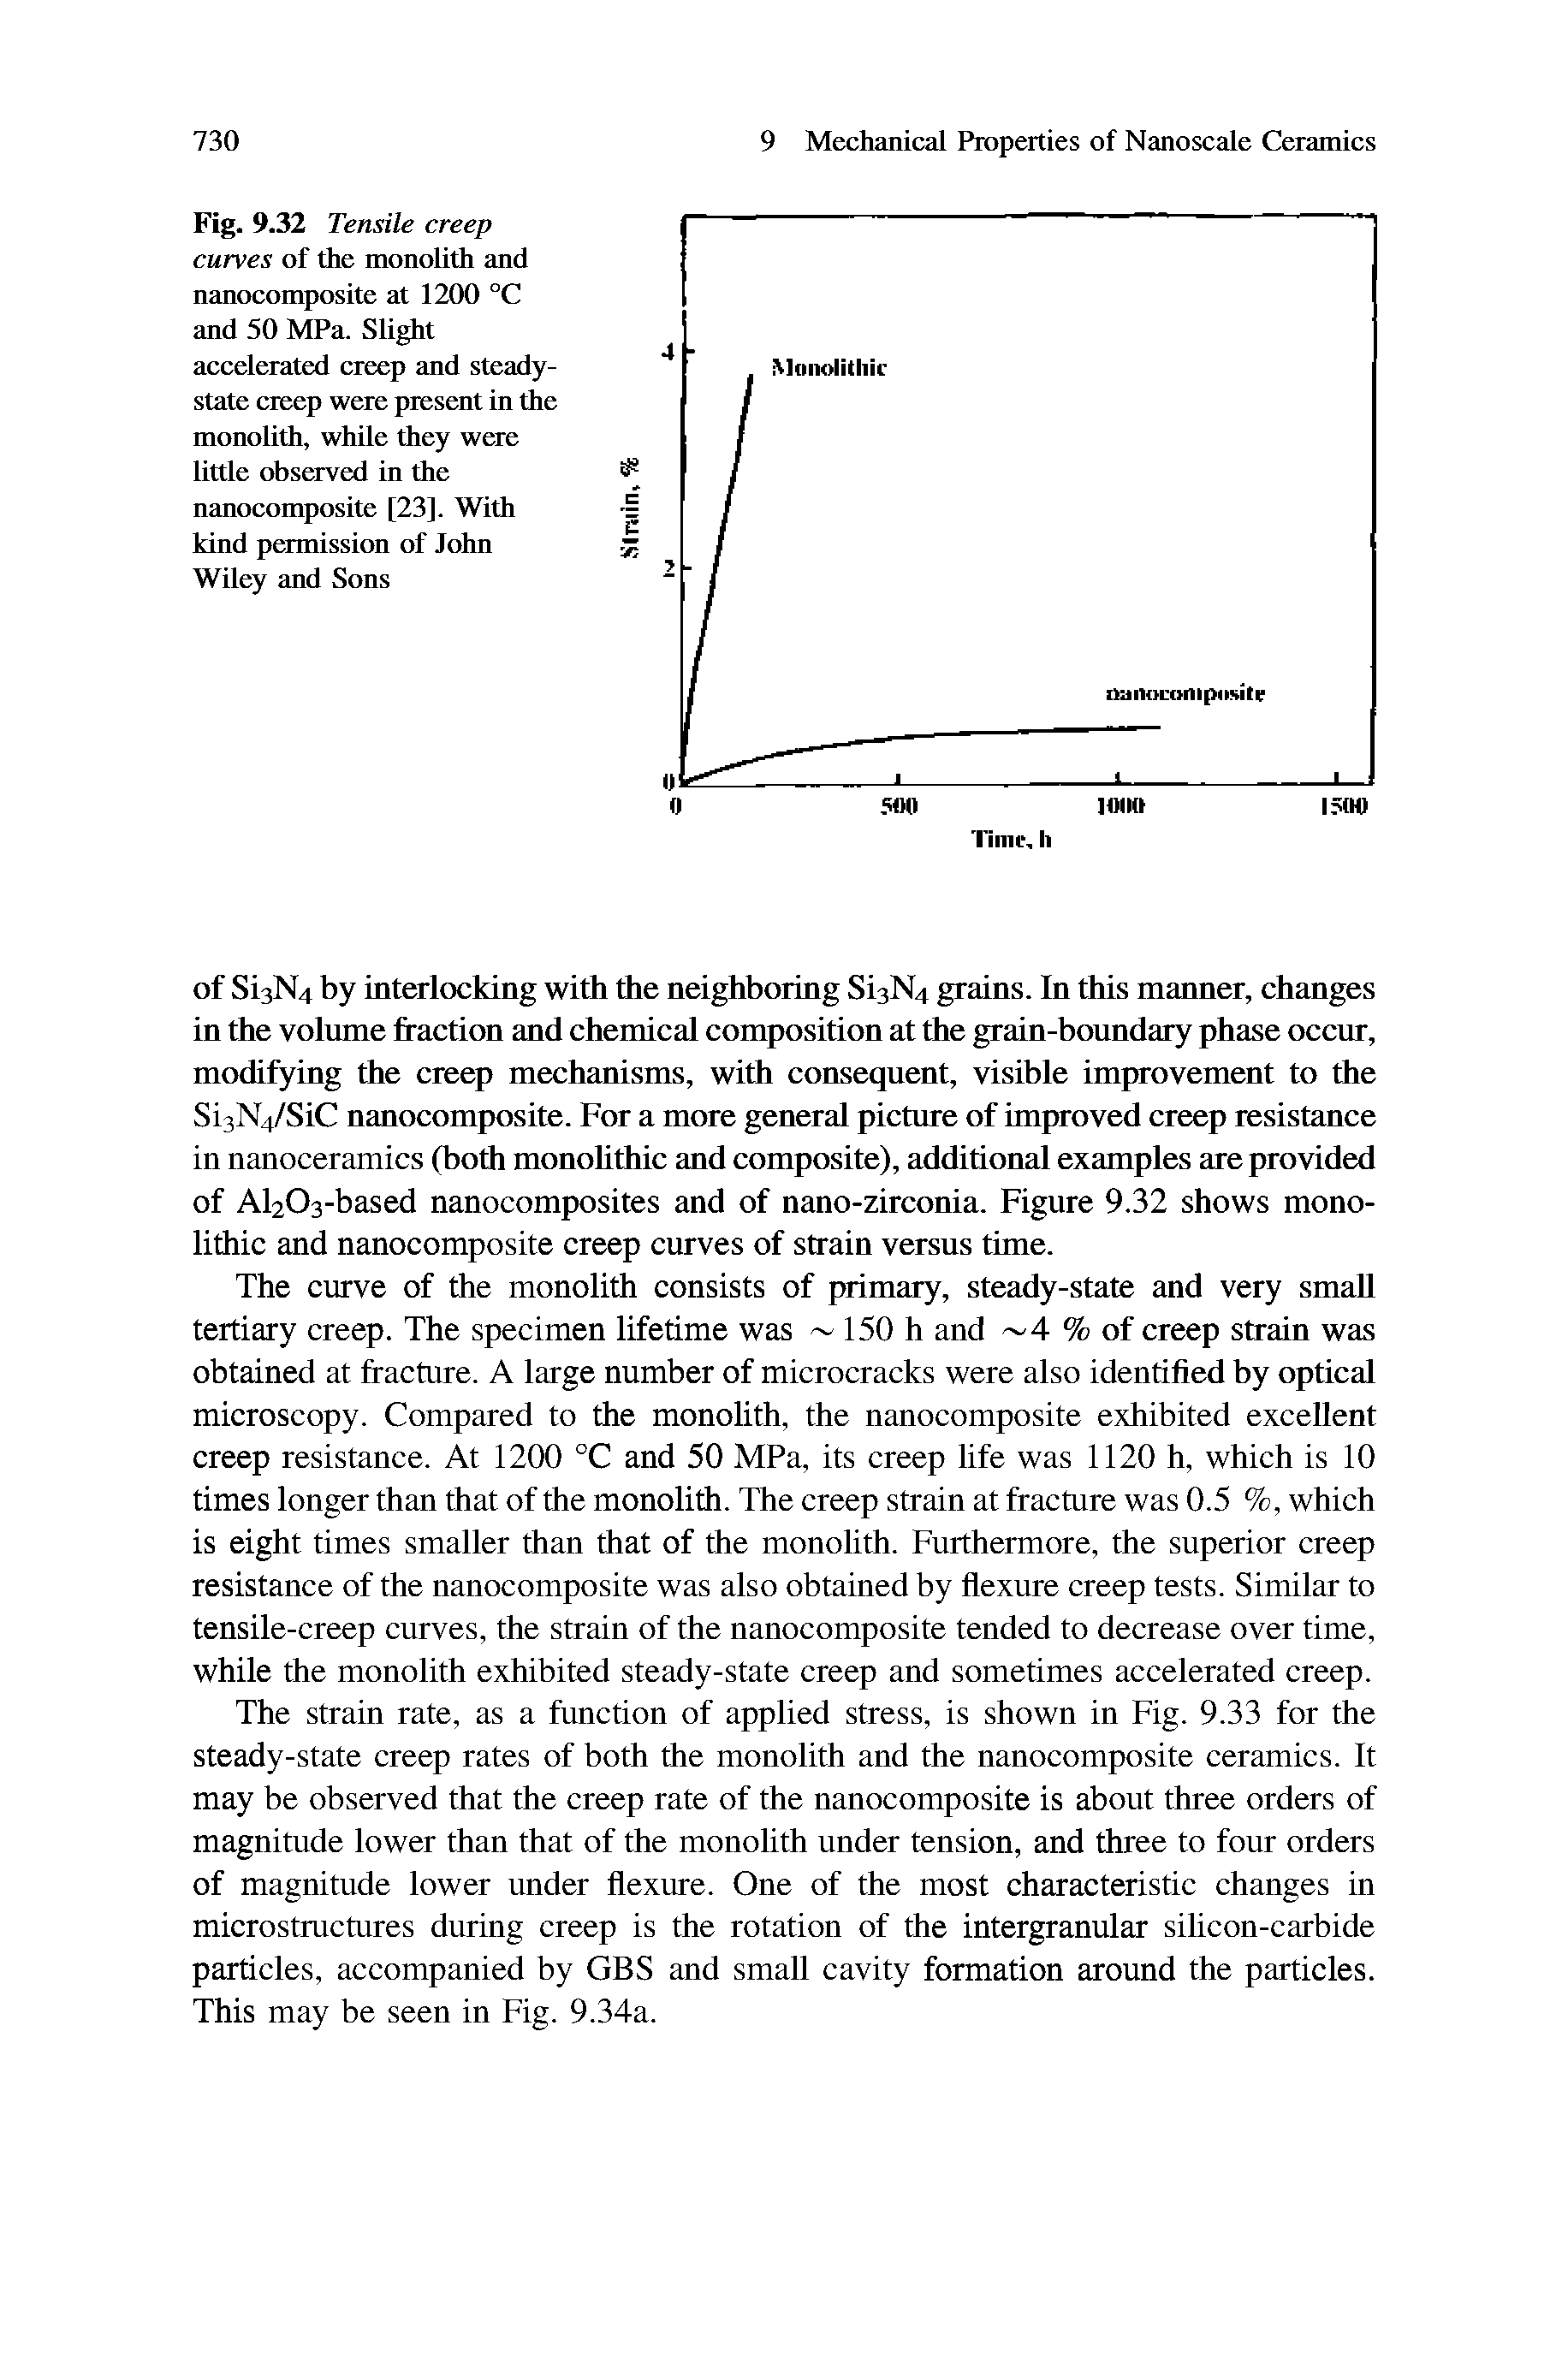 Fig. 9.32 Tensile creep curves of the monolith and nanocomposite at 1200 °C and 50 MPa. Slight accelerated creep and steady-state creep were present in the monolith, while they were little observed in the nanocomposite [23]. With kind permission of John Wiley and Sons...